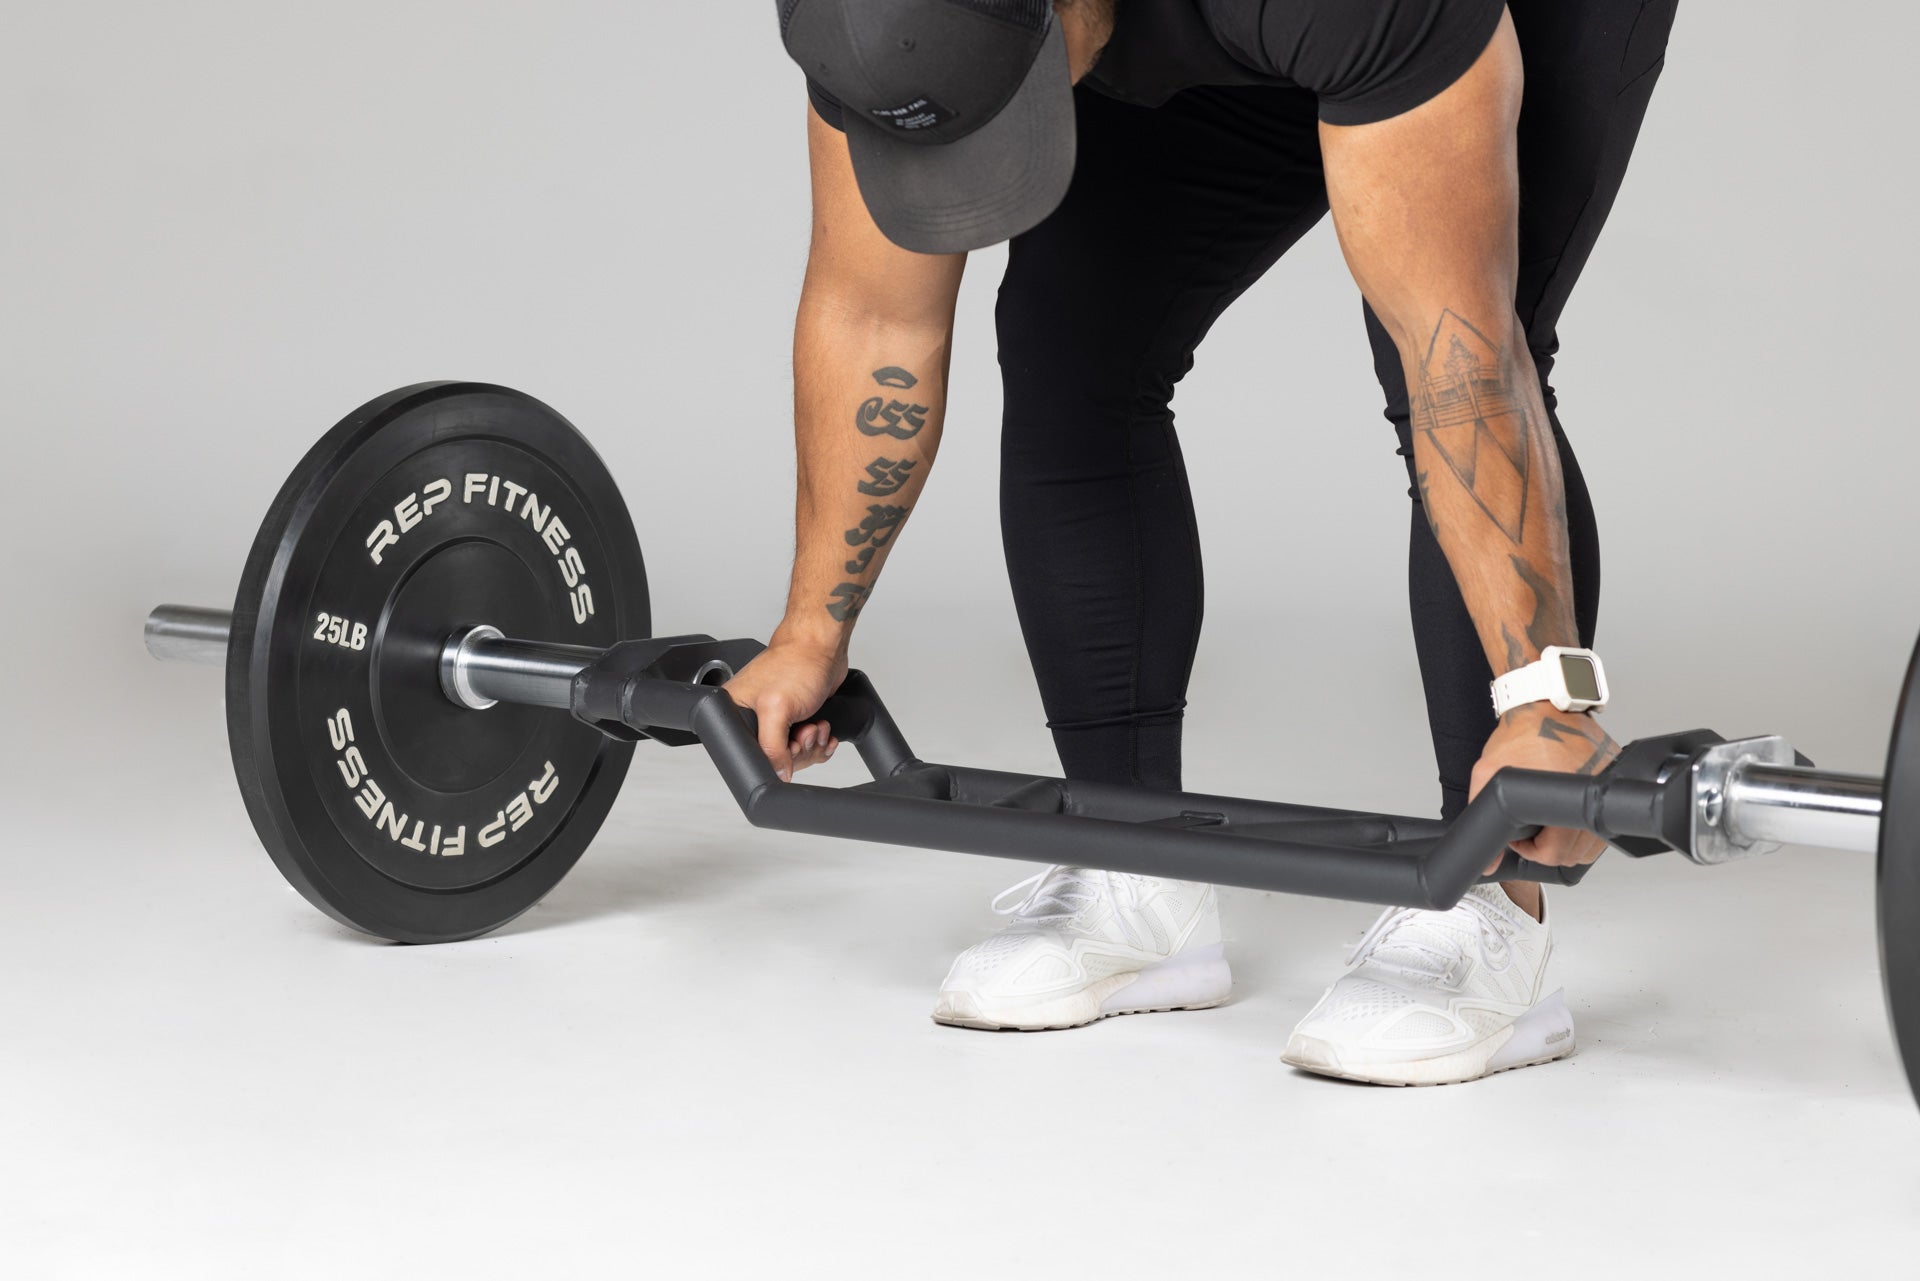 Lifter preparing to use loaded Cambered Swiss Bar from the floor.